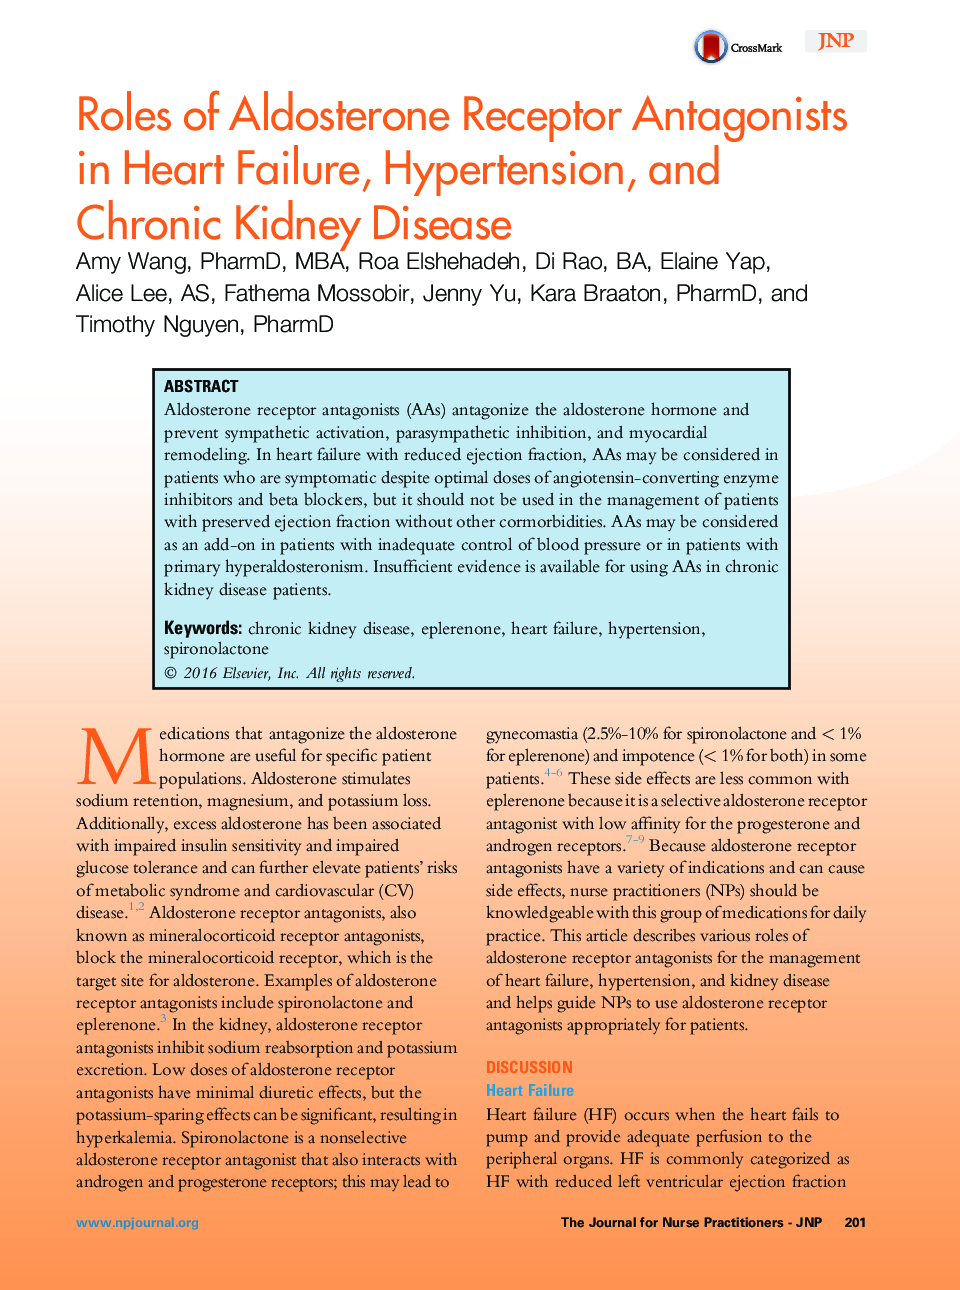 Roles of Aldosterone Receptor Antagonists in Heart Failure, Hypertension, and Chronic Kidney Disease 